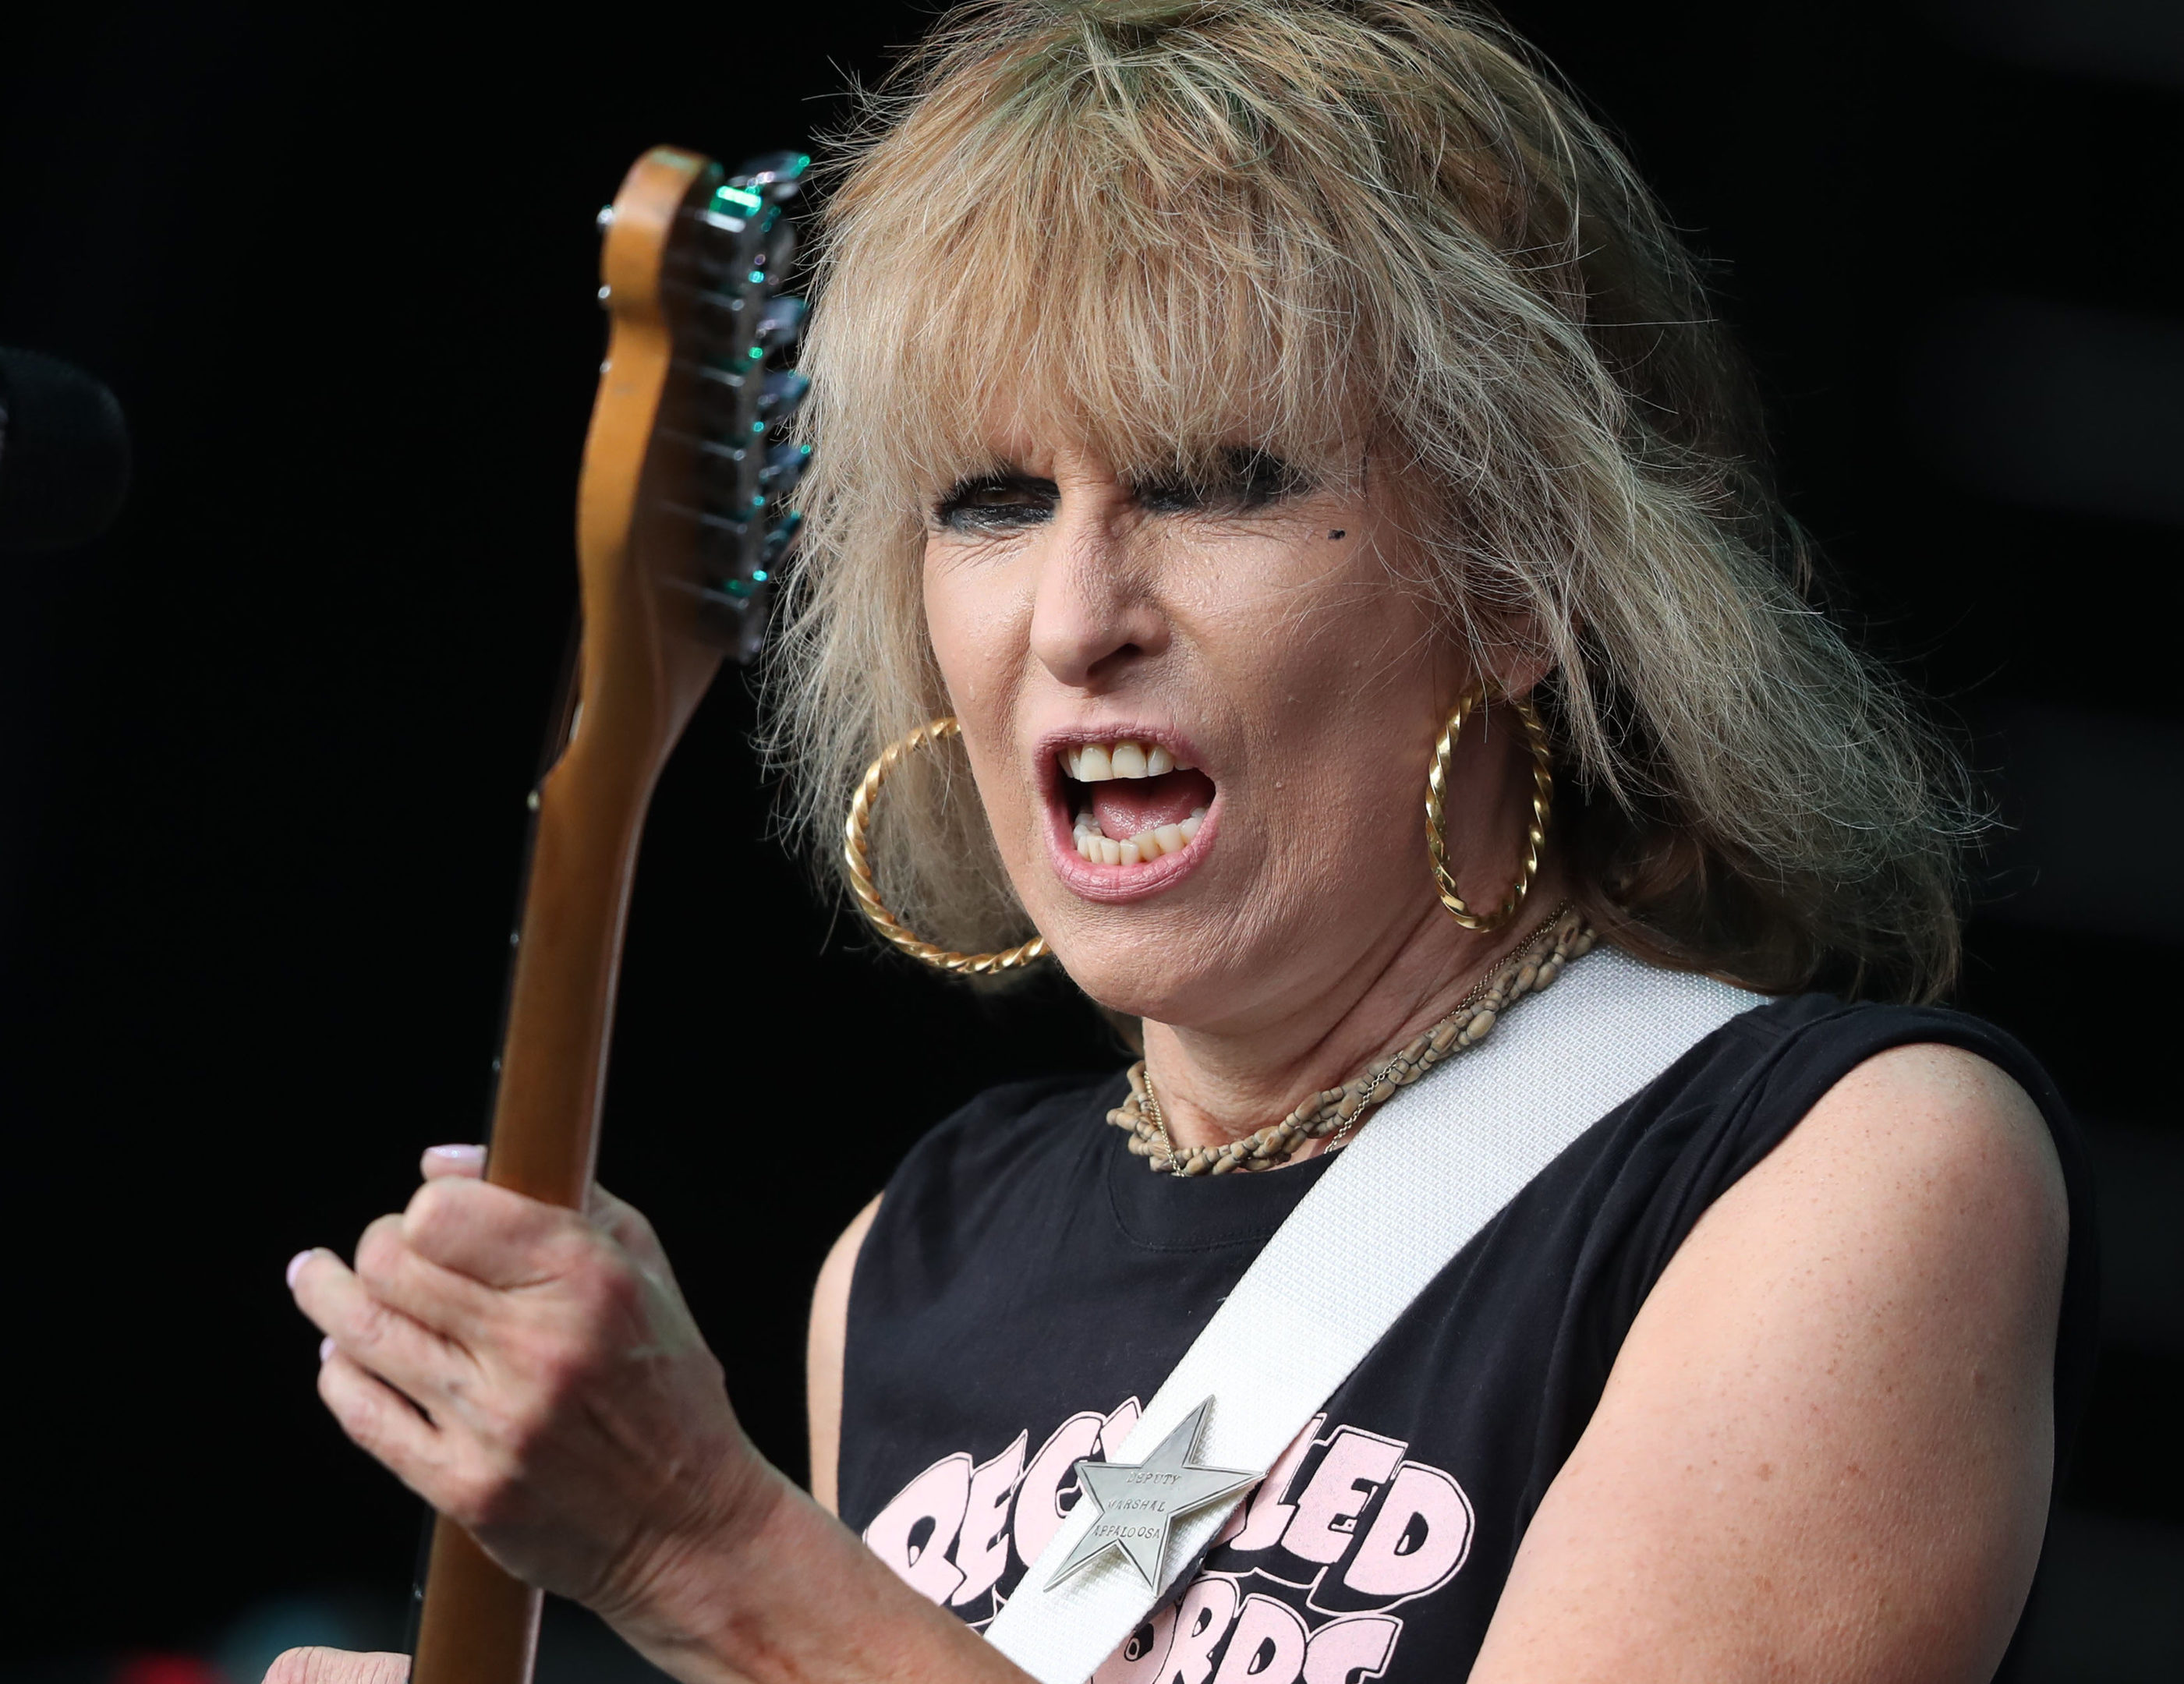 Chrissie Hynde of The Pretenders.